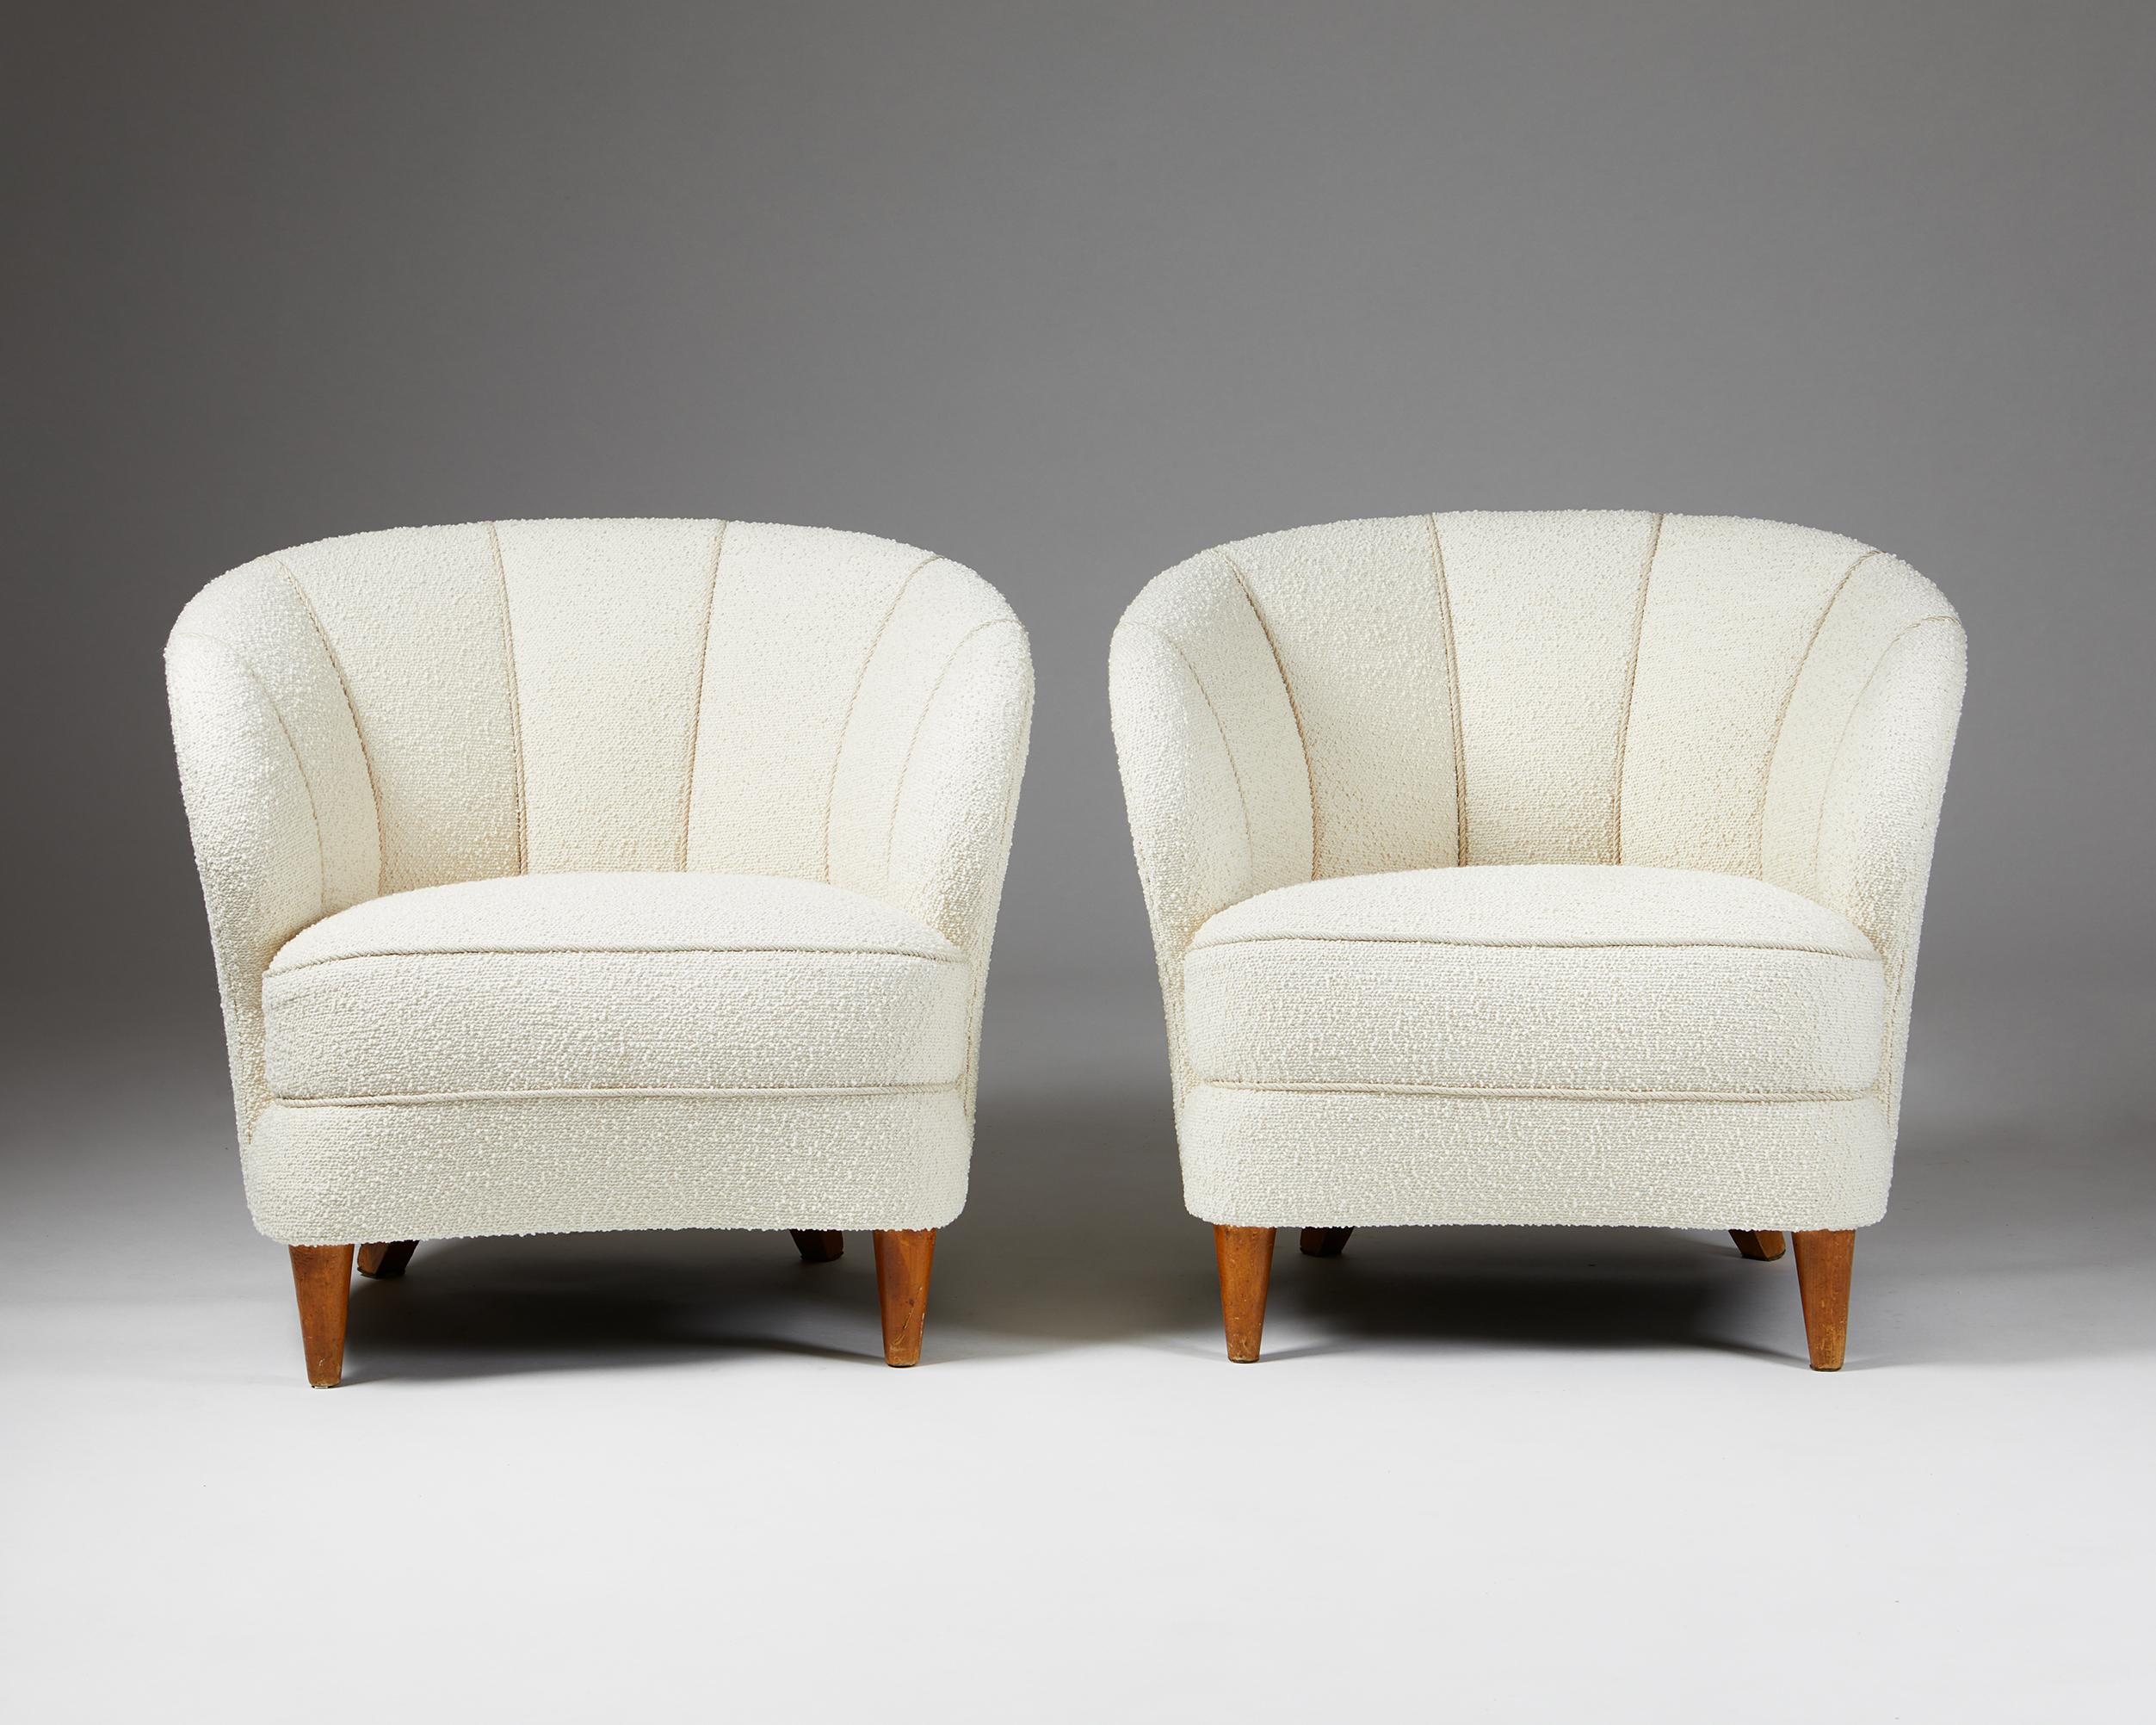 20th Century Pair of Easy Chairs Attributed to Carl-Johan Boman, Finland, 1950s